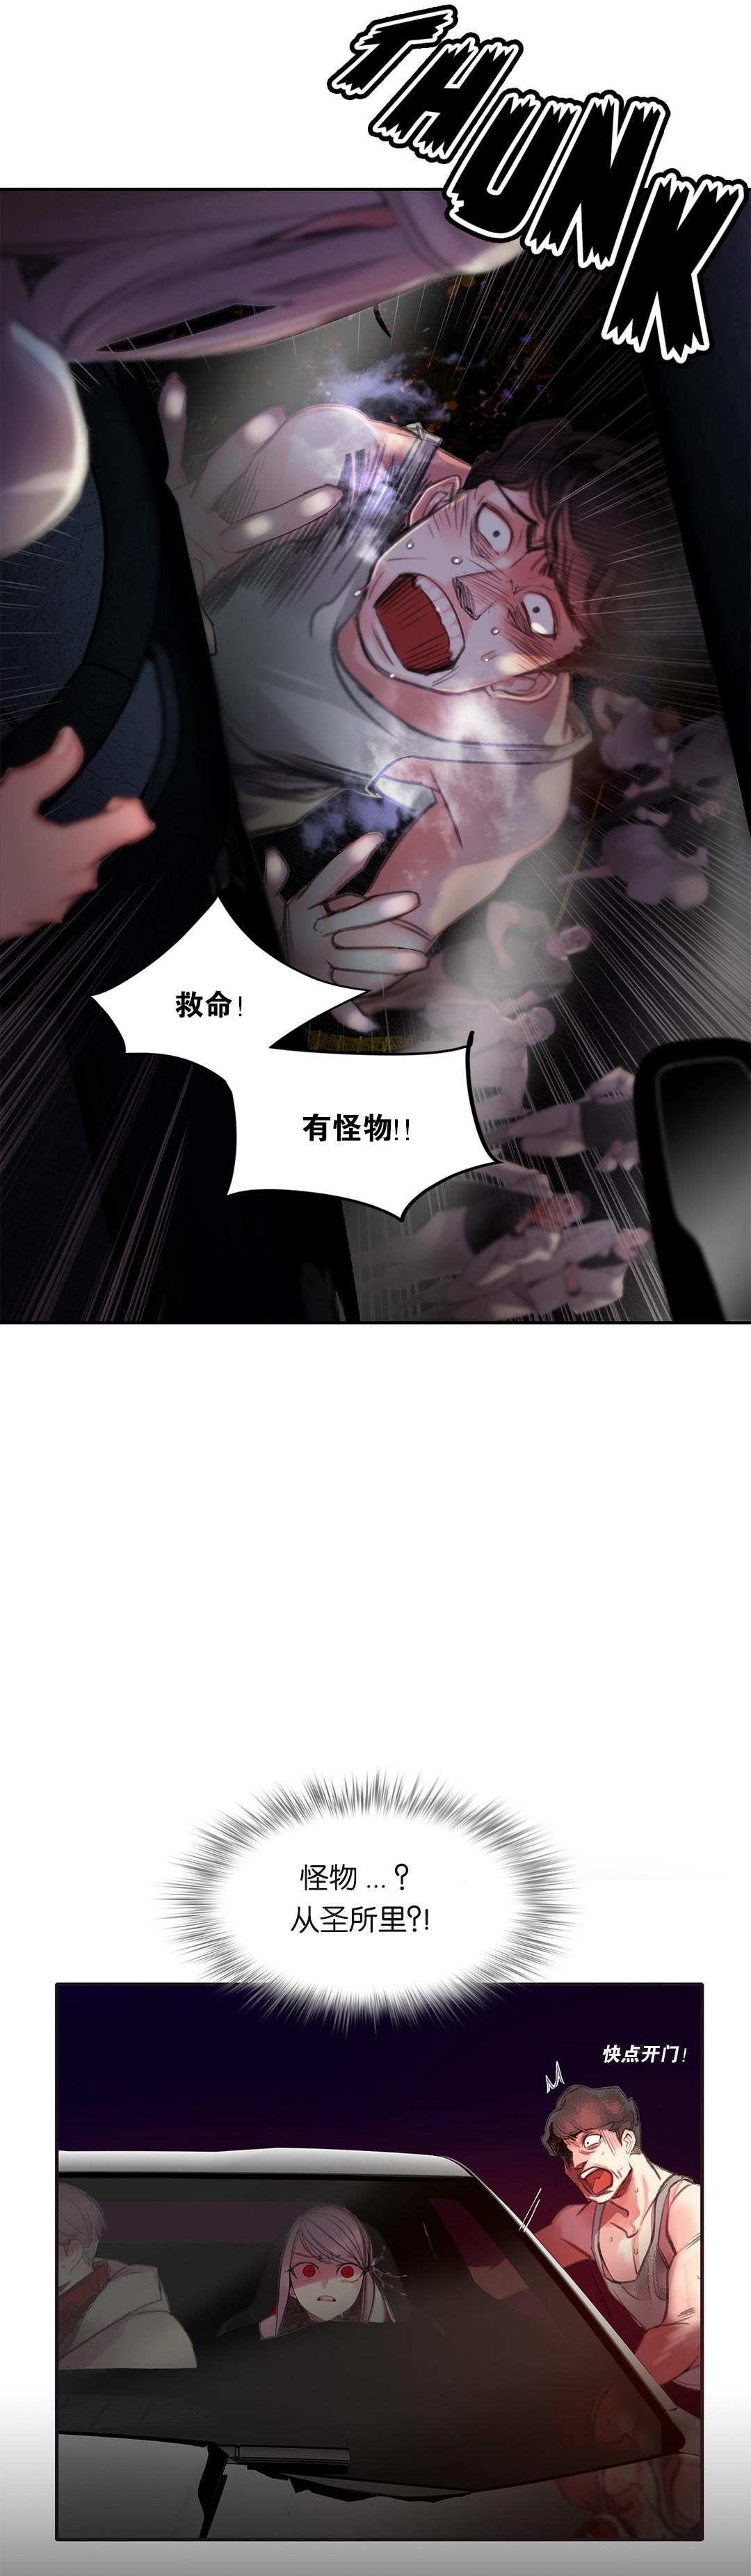 [Juder] Lilith`s Cord (第二季) Ch.61-66 [Chinese] [aaatwist个人汉化] [Ongoing] 14